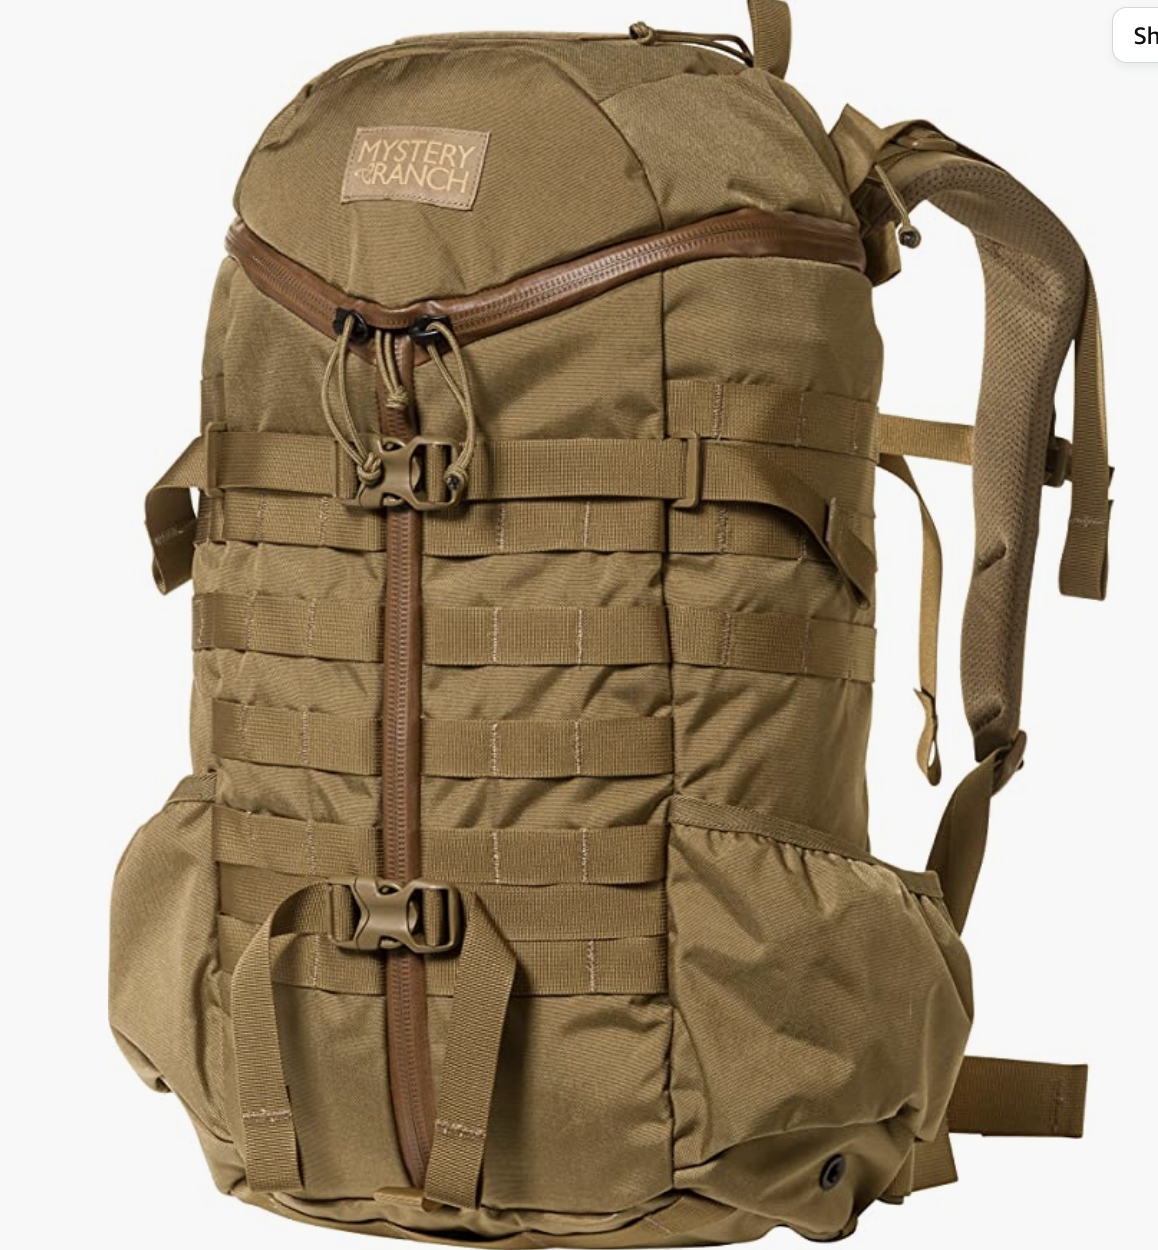 Mystery Ranch Backpack